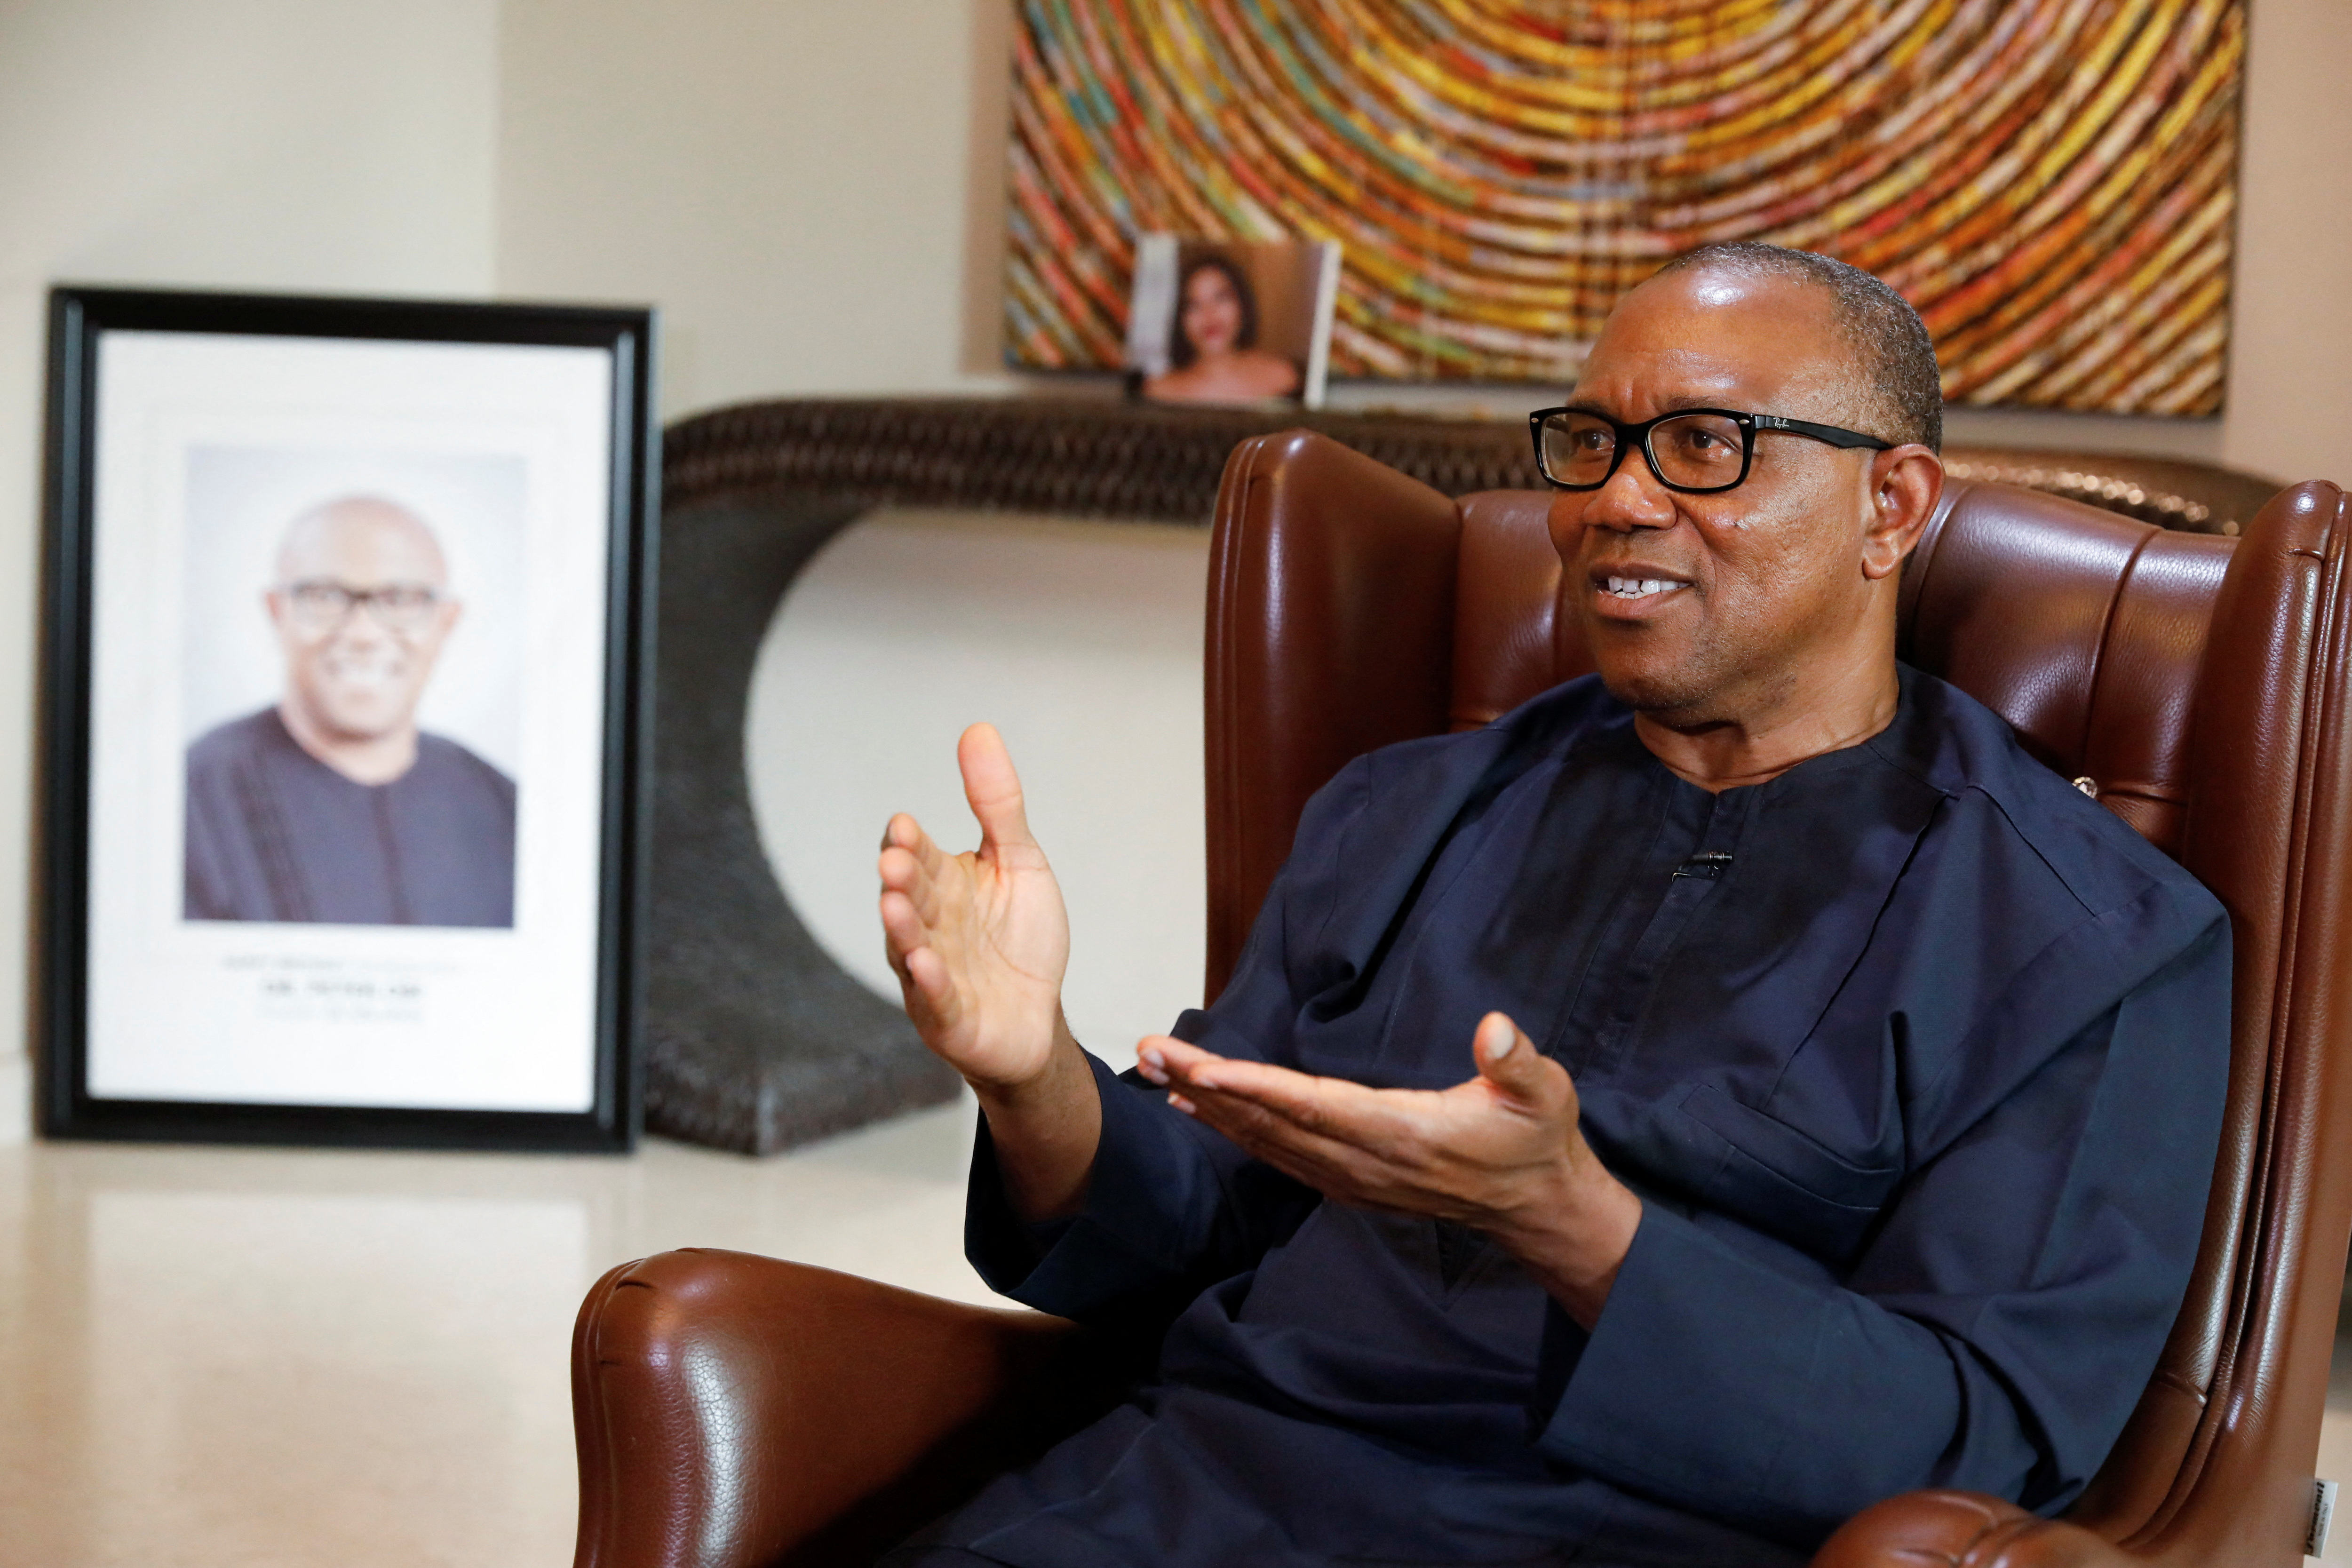 Peter Obi, Presidential candidate of the Labour Party, gestures during an interview with Reuters at his residence in Lagos